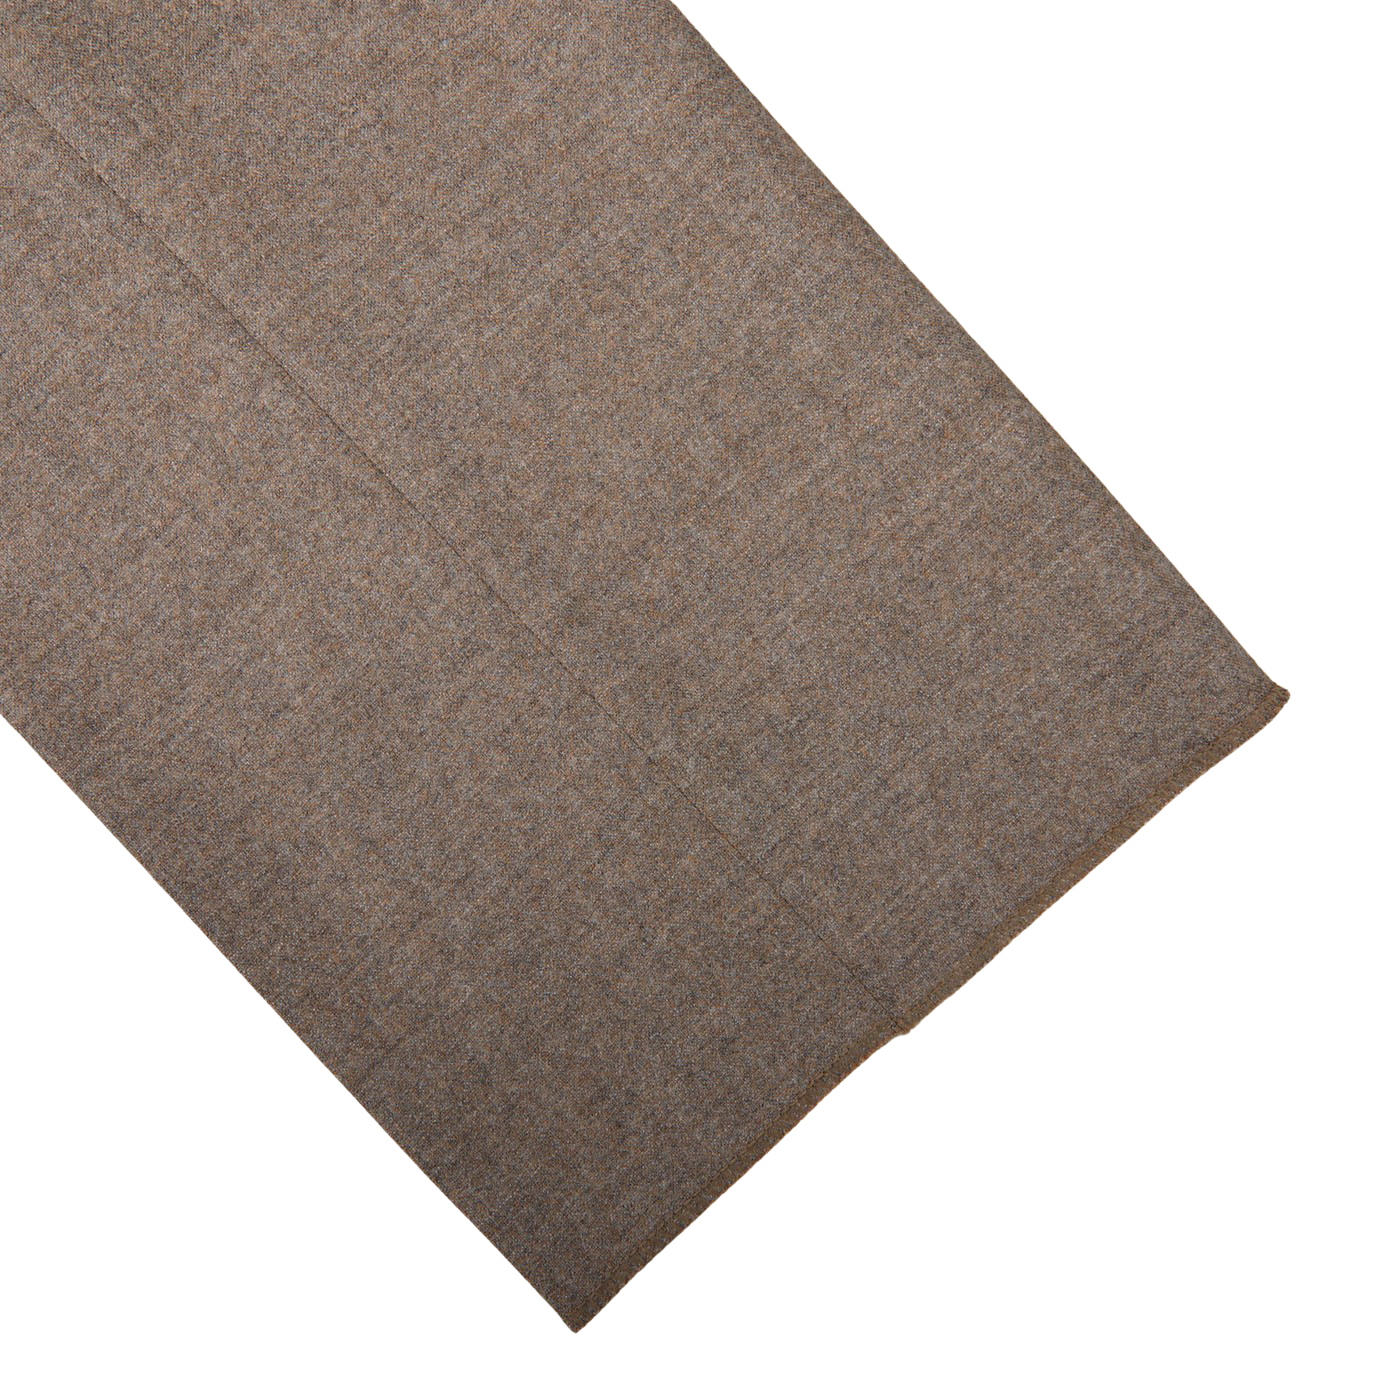 A Beige Grey Wool Flannel K Suit blanket on a white surface.